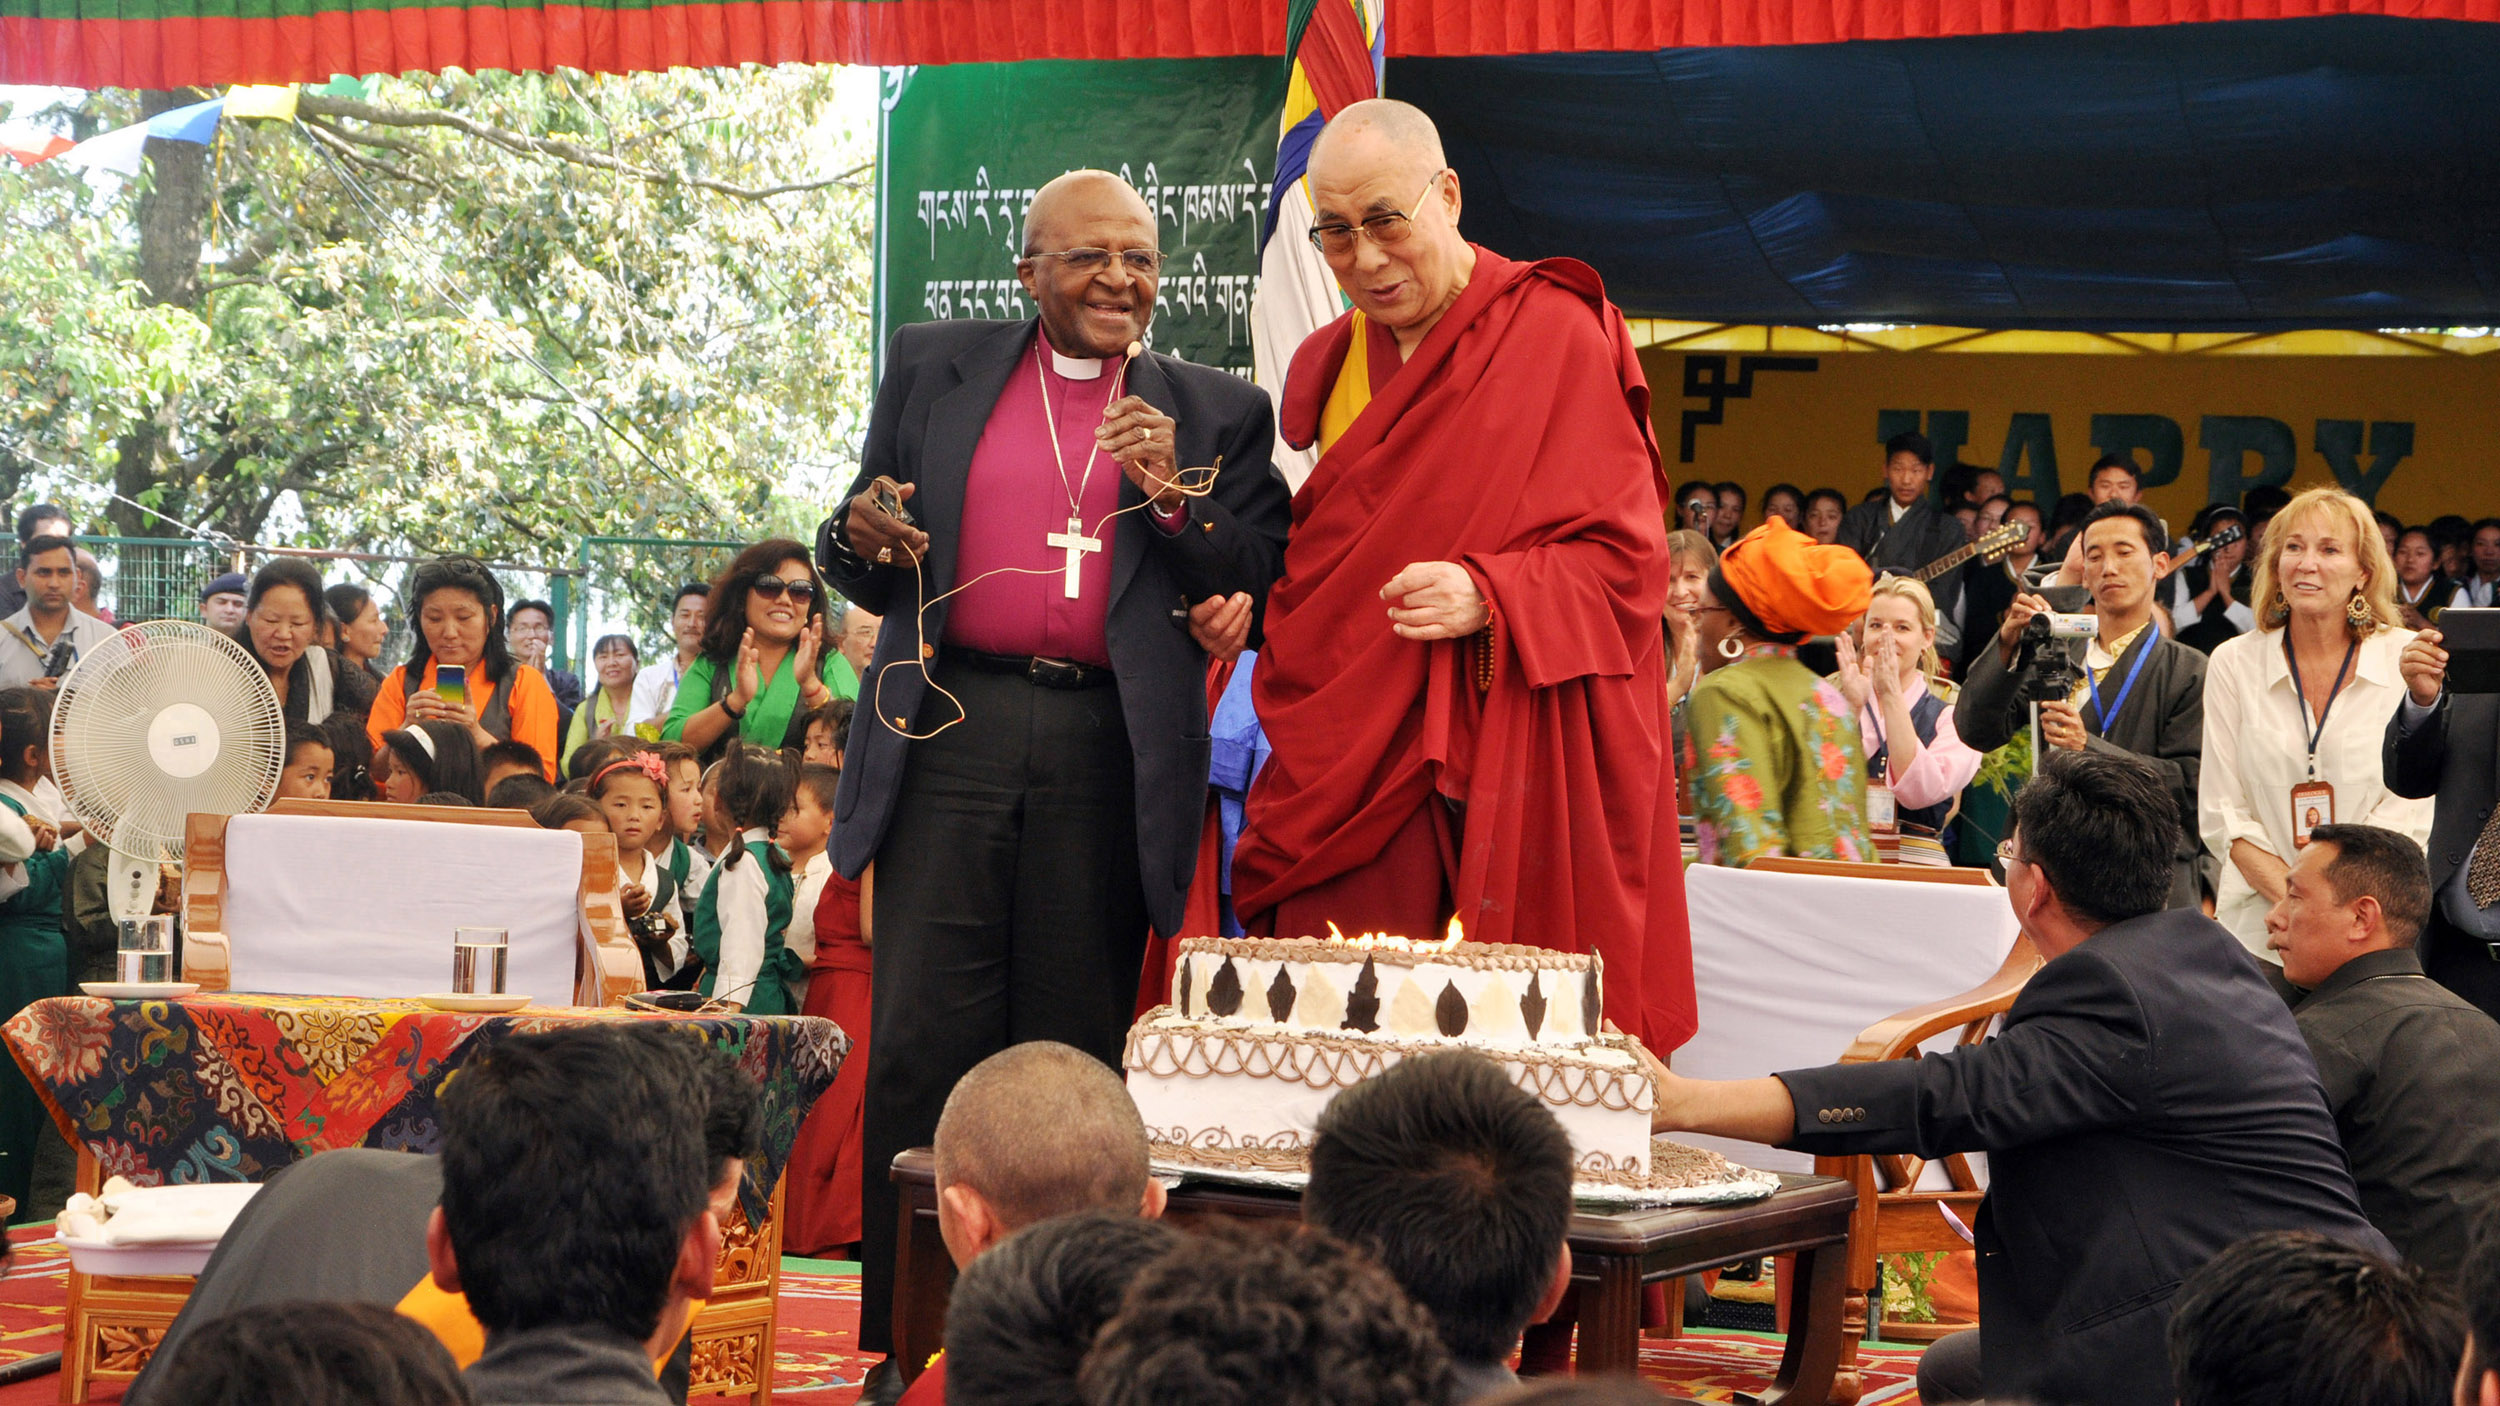 Spiritual leader Dalai Lama to blow out candles on his birthday cake as retired Archbishop Desmond Tutu looks on at the Tibetan Childrens Village School in Dharmsala, India, on April 23, 2015.